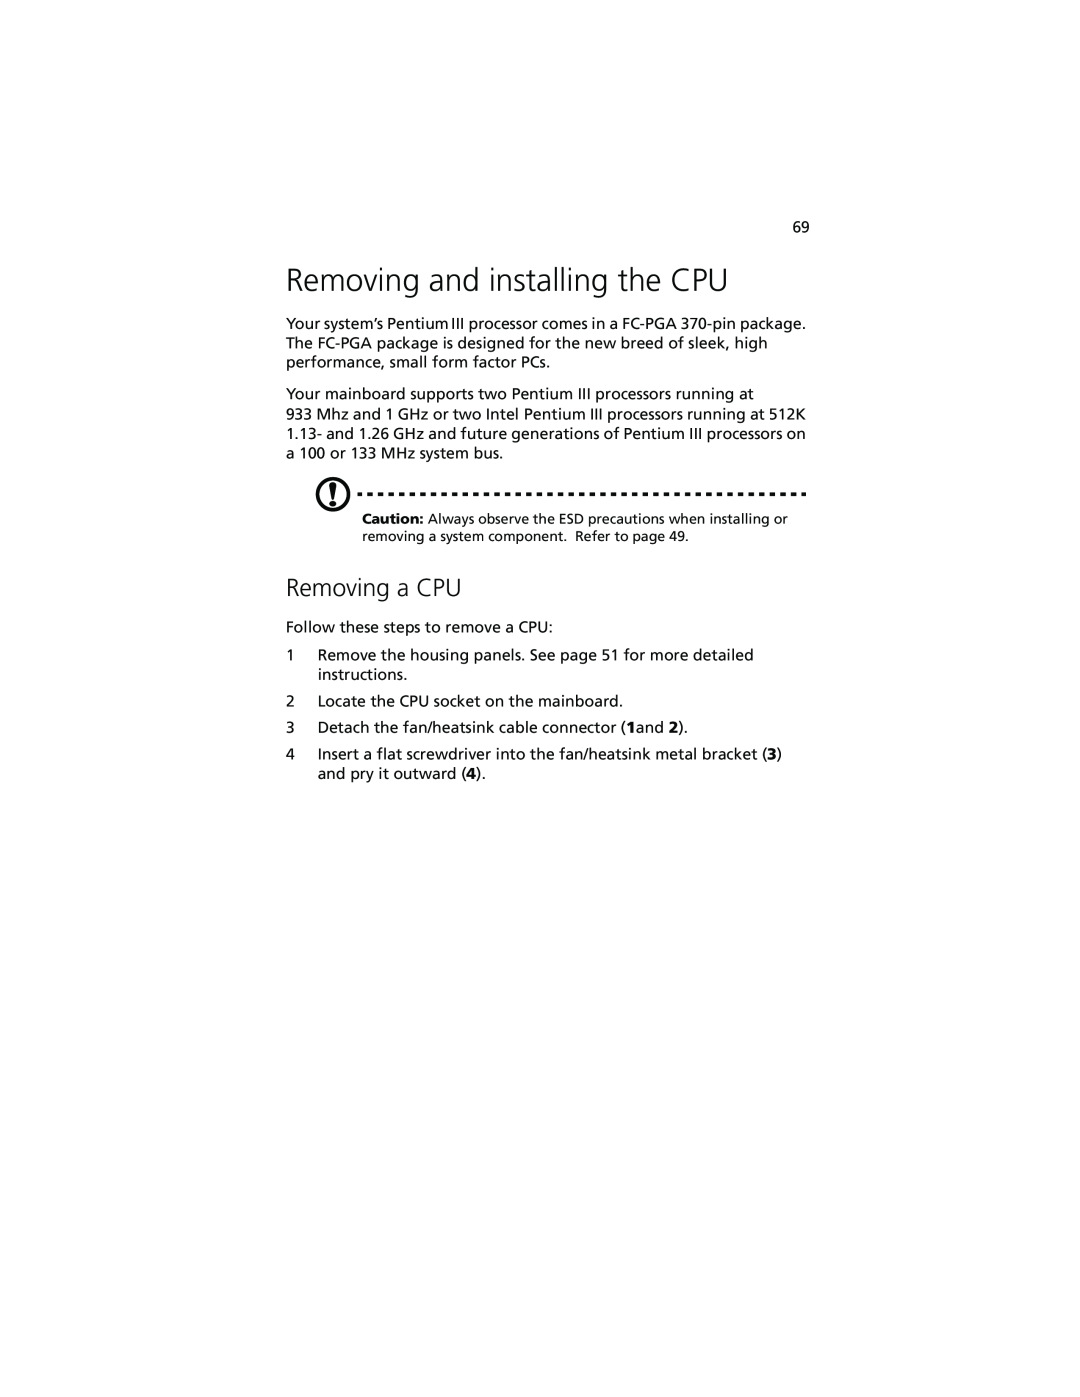 Acer Altos G610 manual Removing and installing the CPU, Removing a CPU 